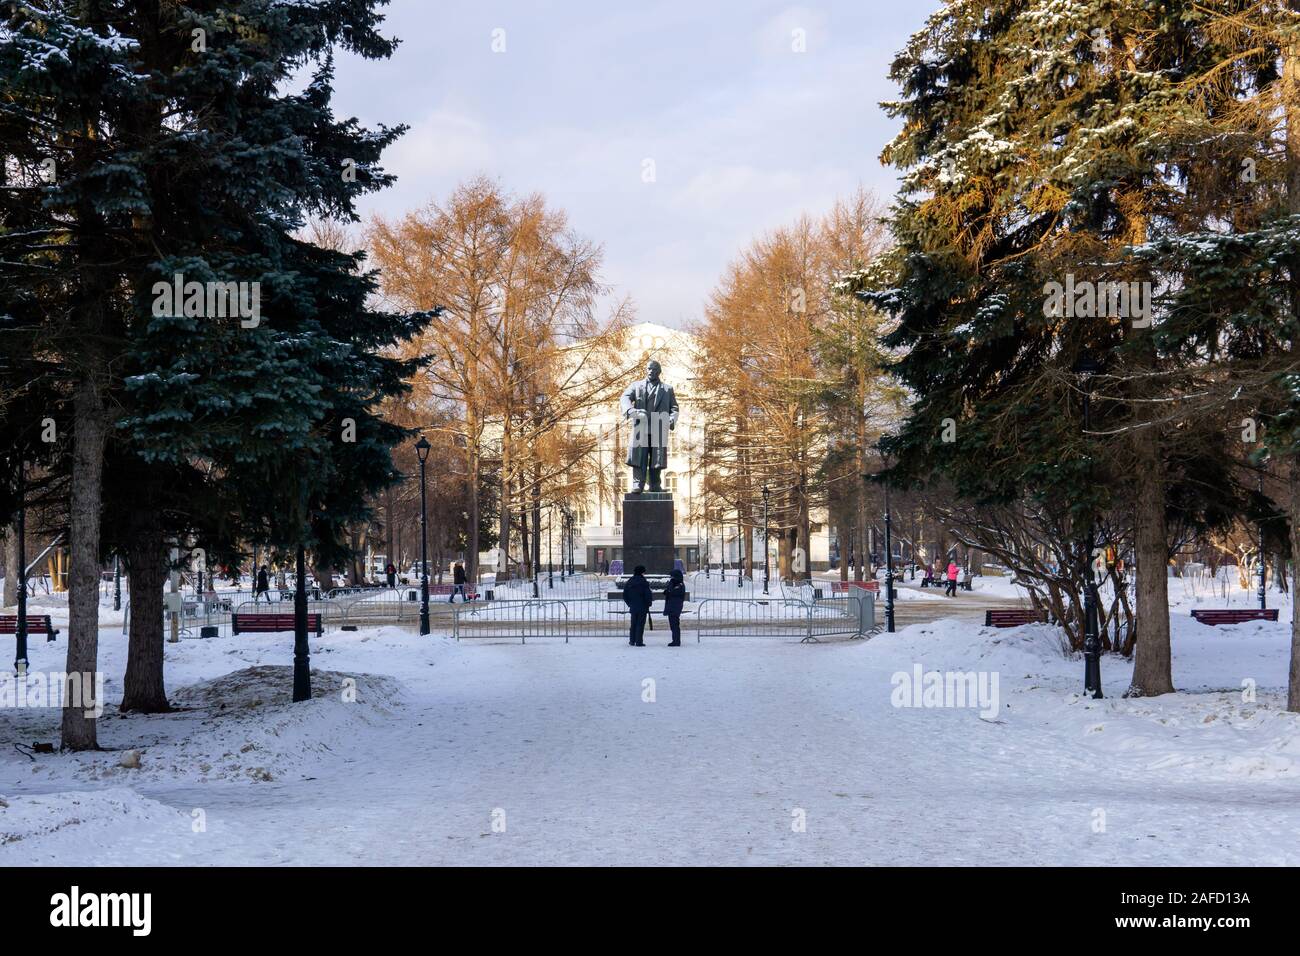 Perm, Russia - December 14, 2019: monument to Vladimir Lenin in the square near the Opera and Ballet Theater Stock Photo